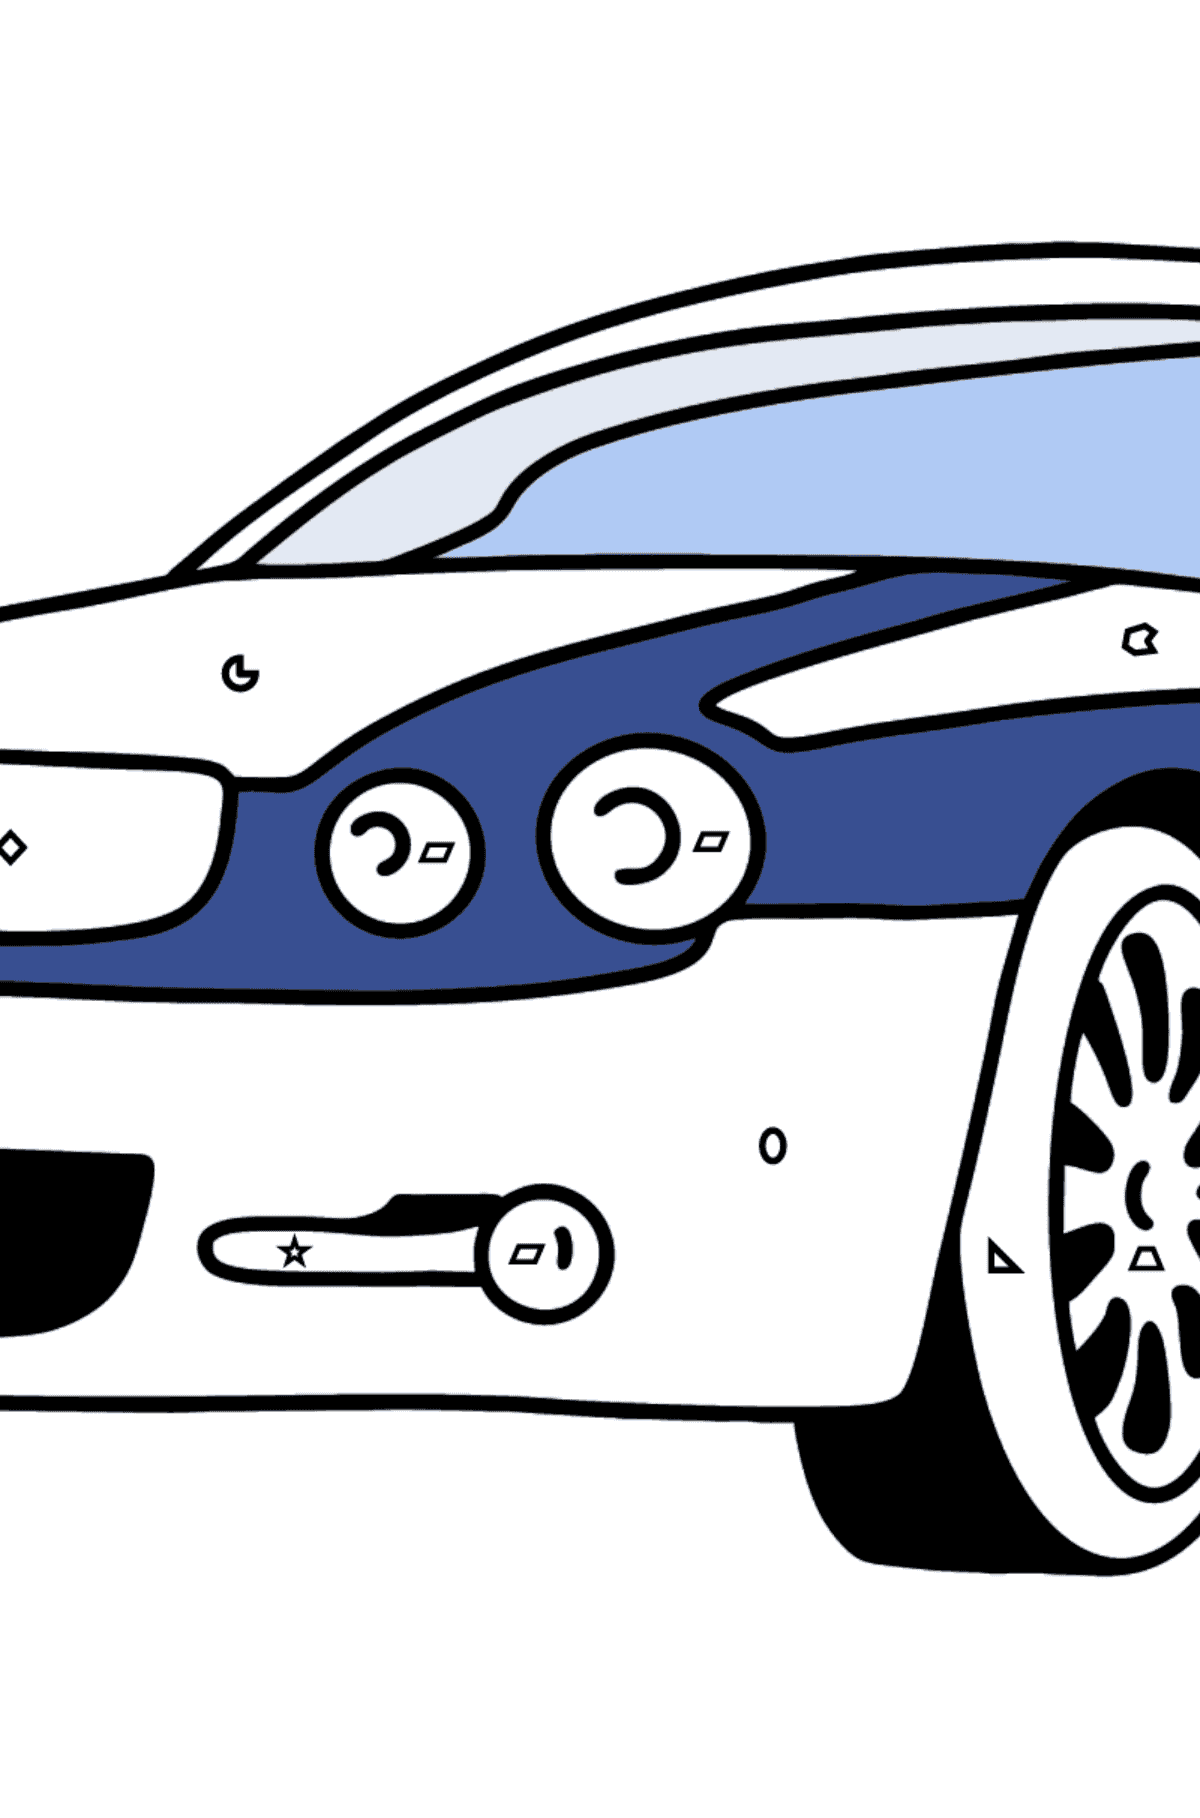 Jaguar GT coloring page - Coloring by Geometric Shapes for Kids